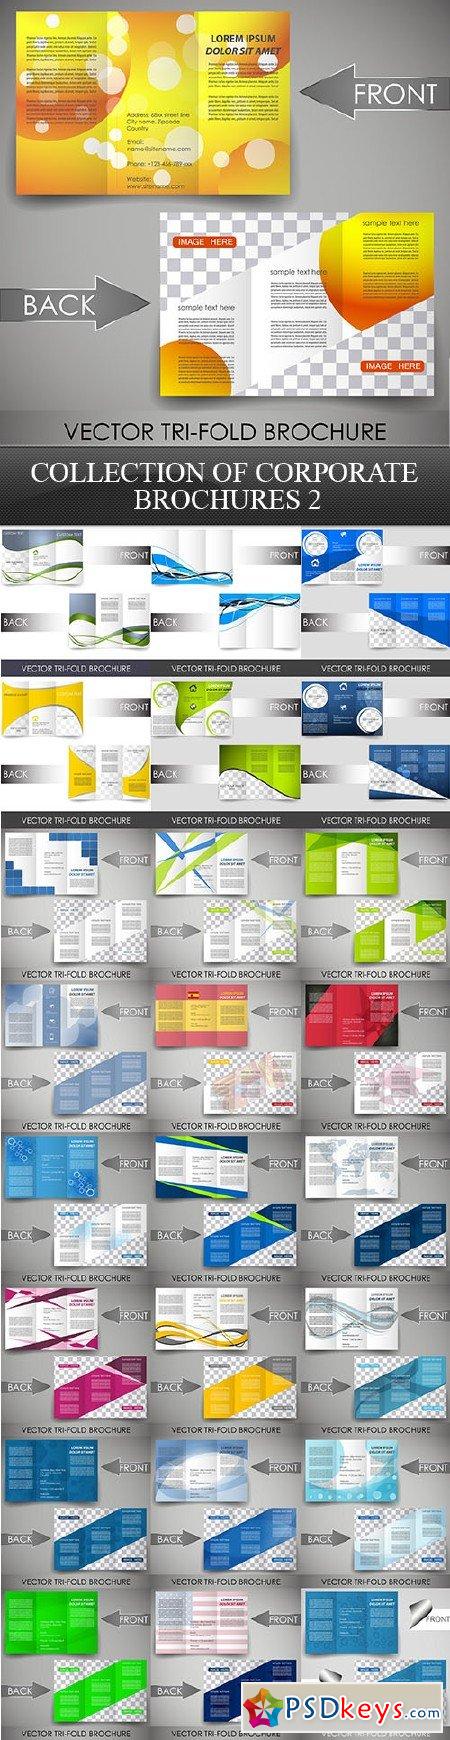 Collection of Corporate Brochures 2 25xEPS